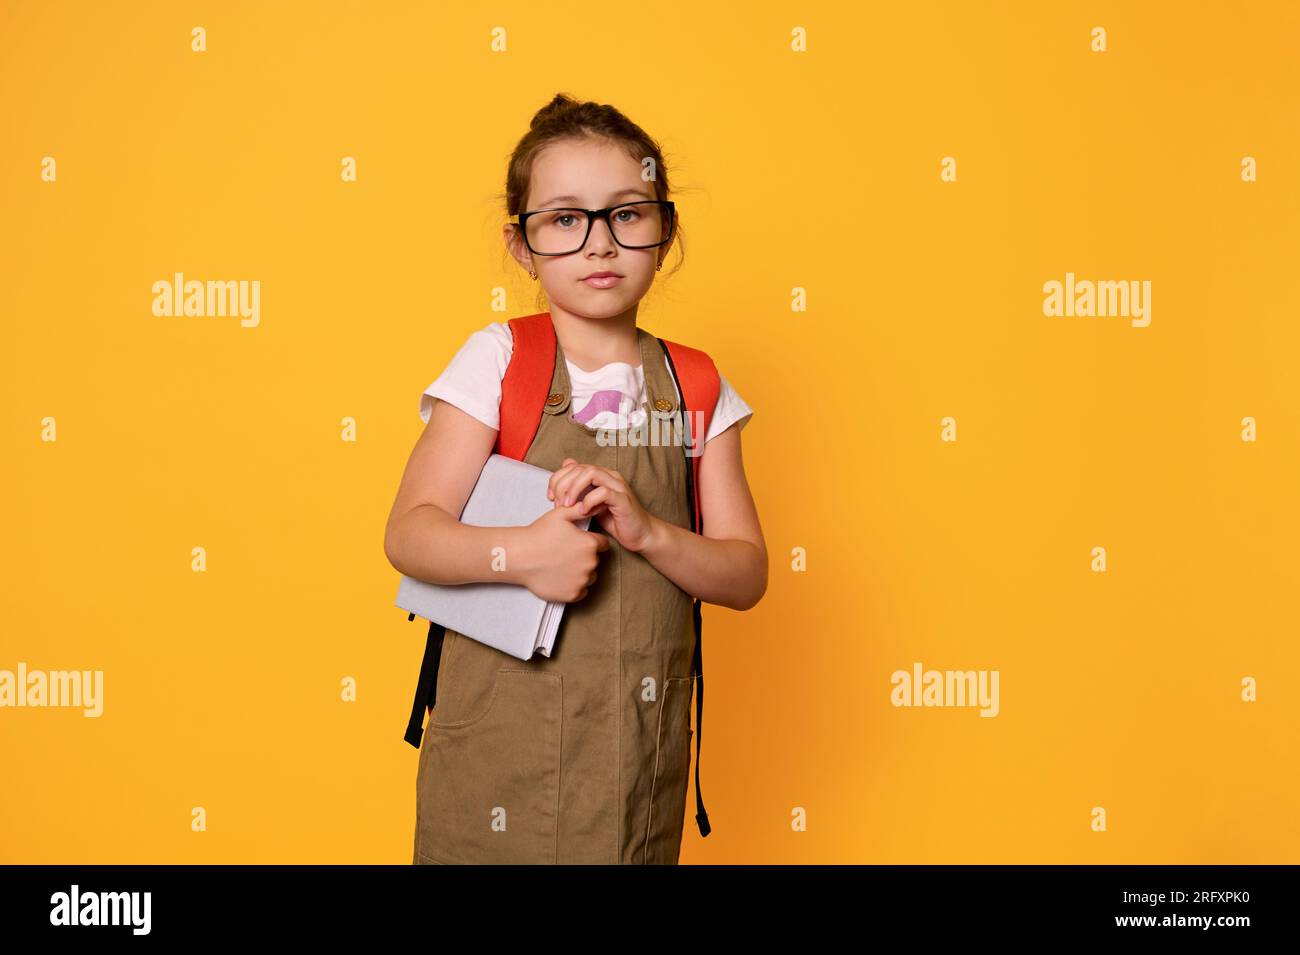 Adevrtising studio portrait of Caucasian confident serious cute little girl 6 years old, with orange backpack, holding a book, dressed in casual cloth Stock Photo